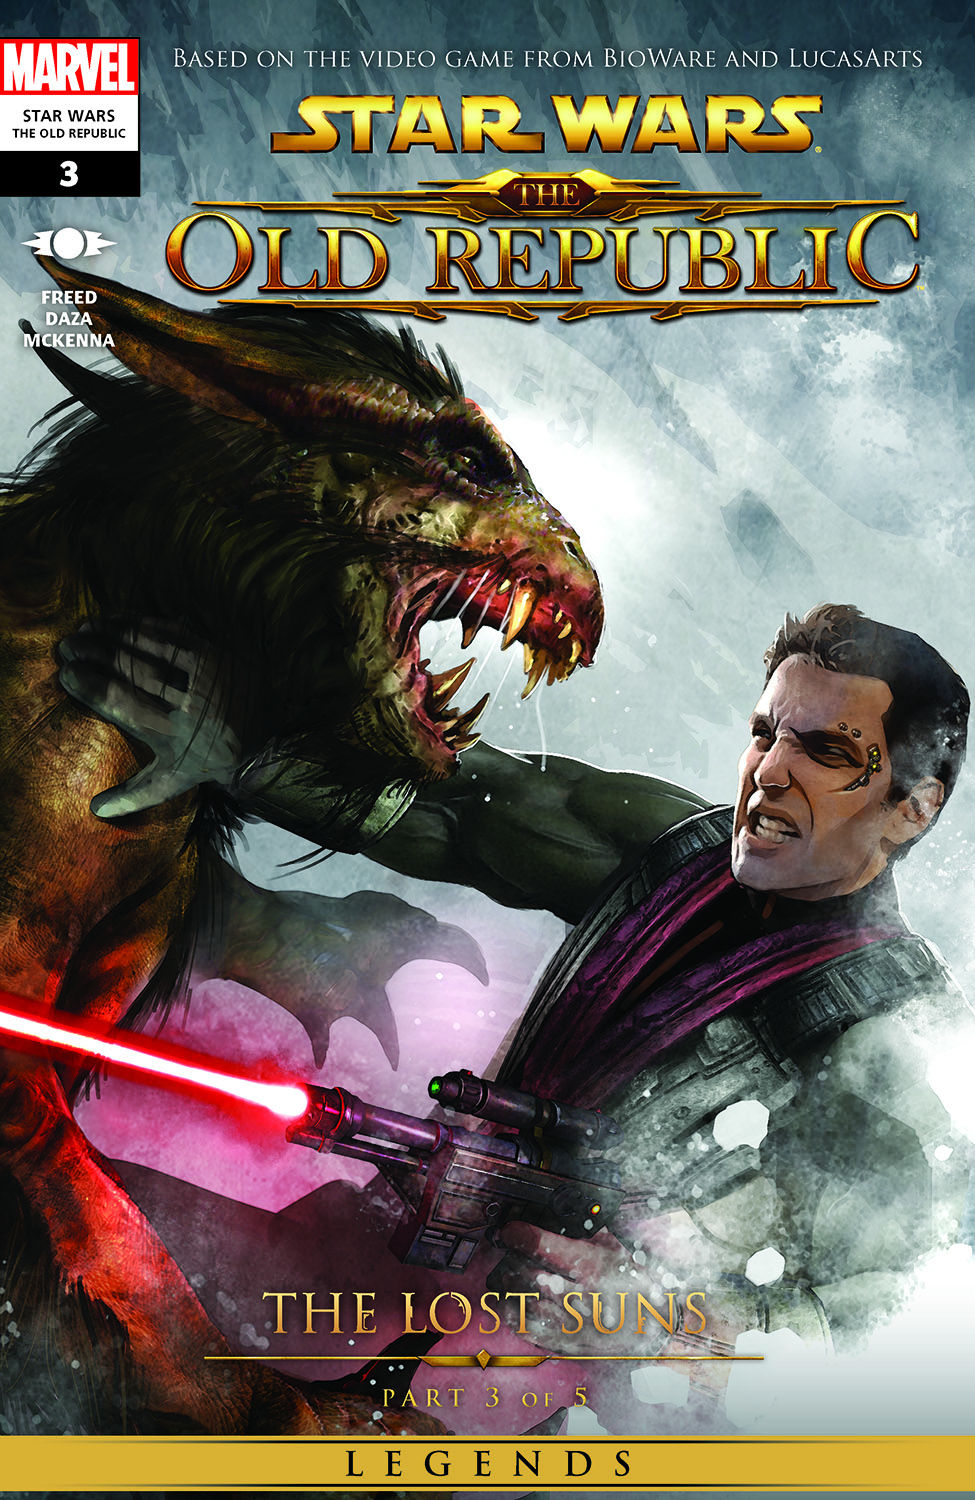 Star Wars: The Old Republic - The Lost Suns (2011) #3